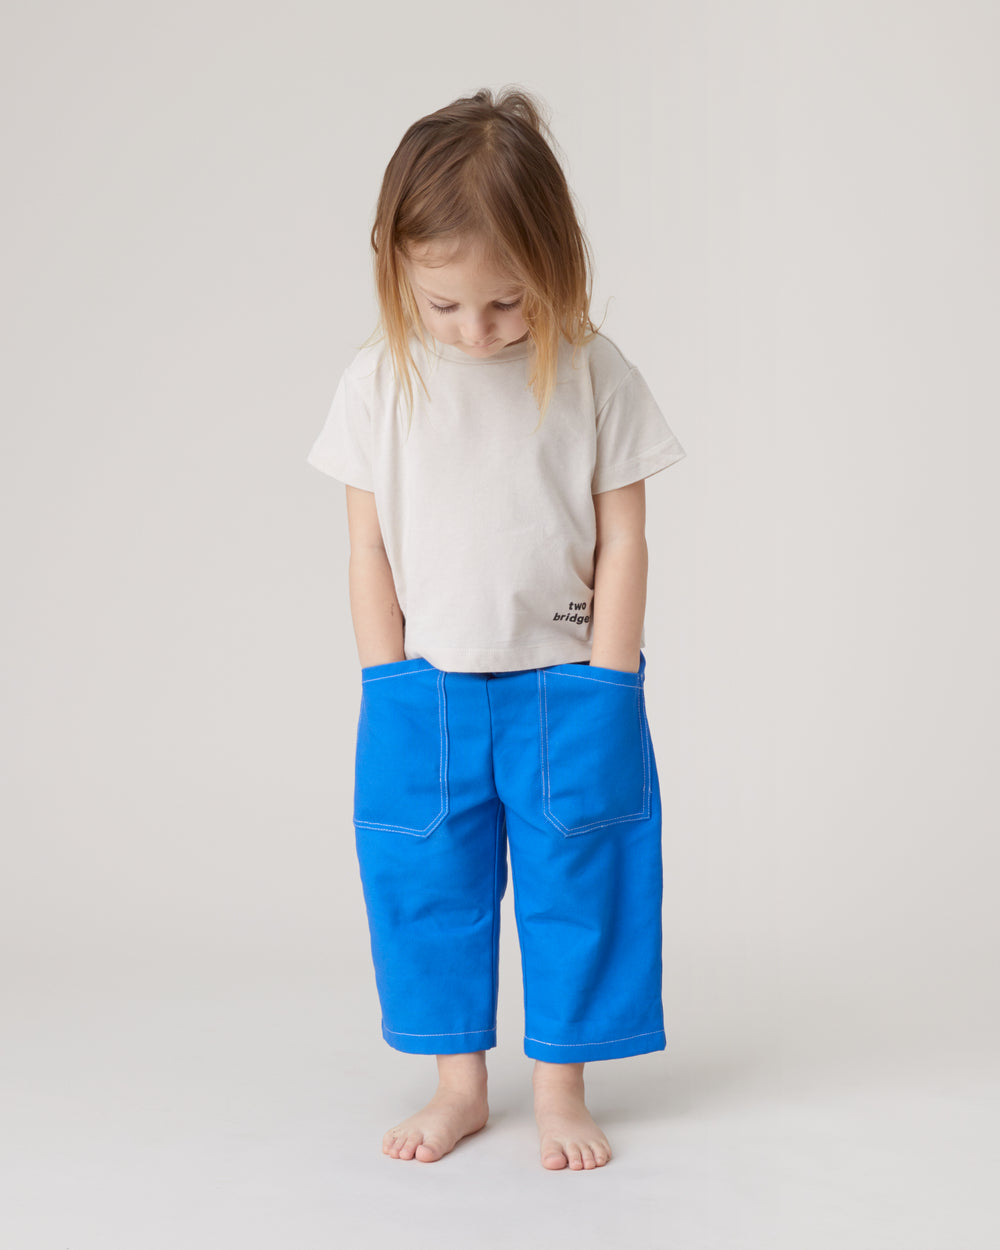 Chatham Trouser in Royal Blue